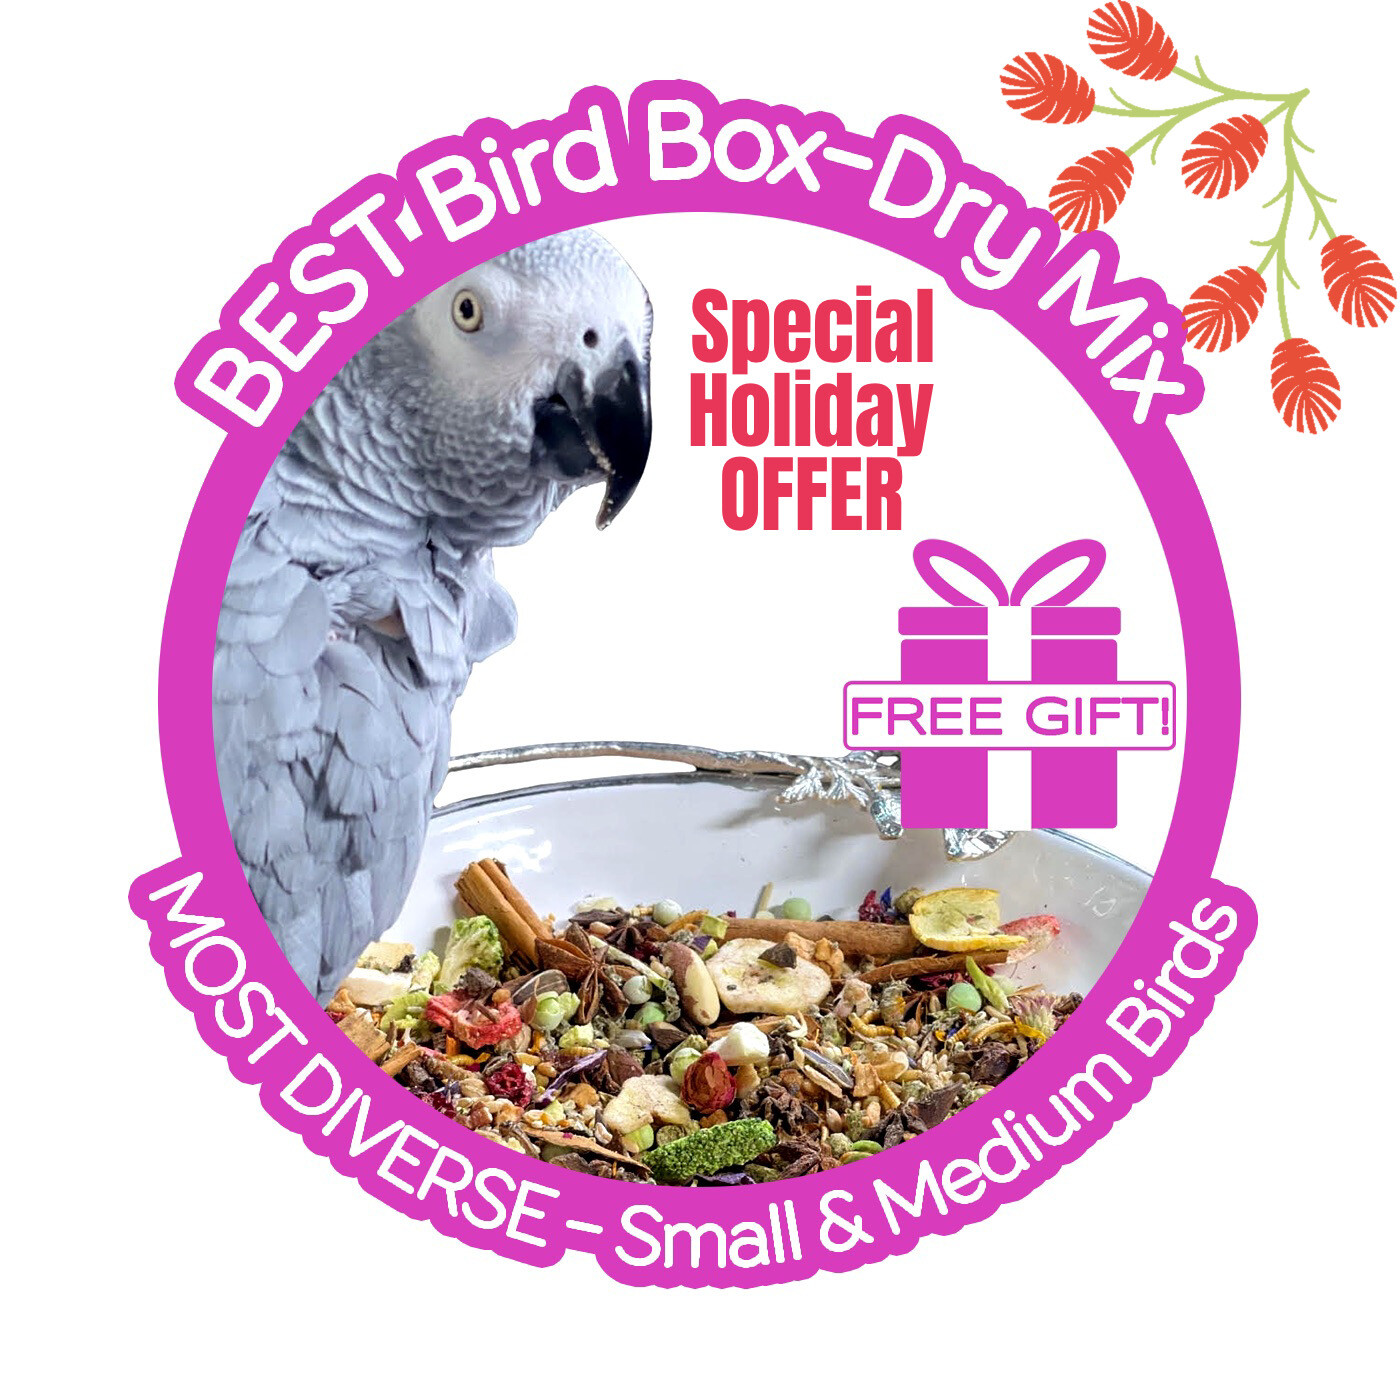 Holiday Thrive! Best Bird Box — Small & Medium Birds (Special Offer - Buy 1, Give 1 or Get 1 at 10% Off PLUS a FREE Extra Bag of FOOD In Each Box)